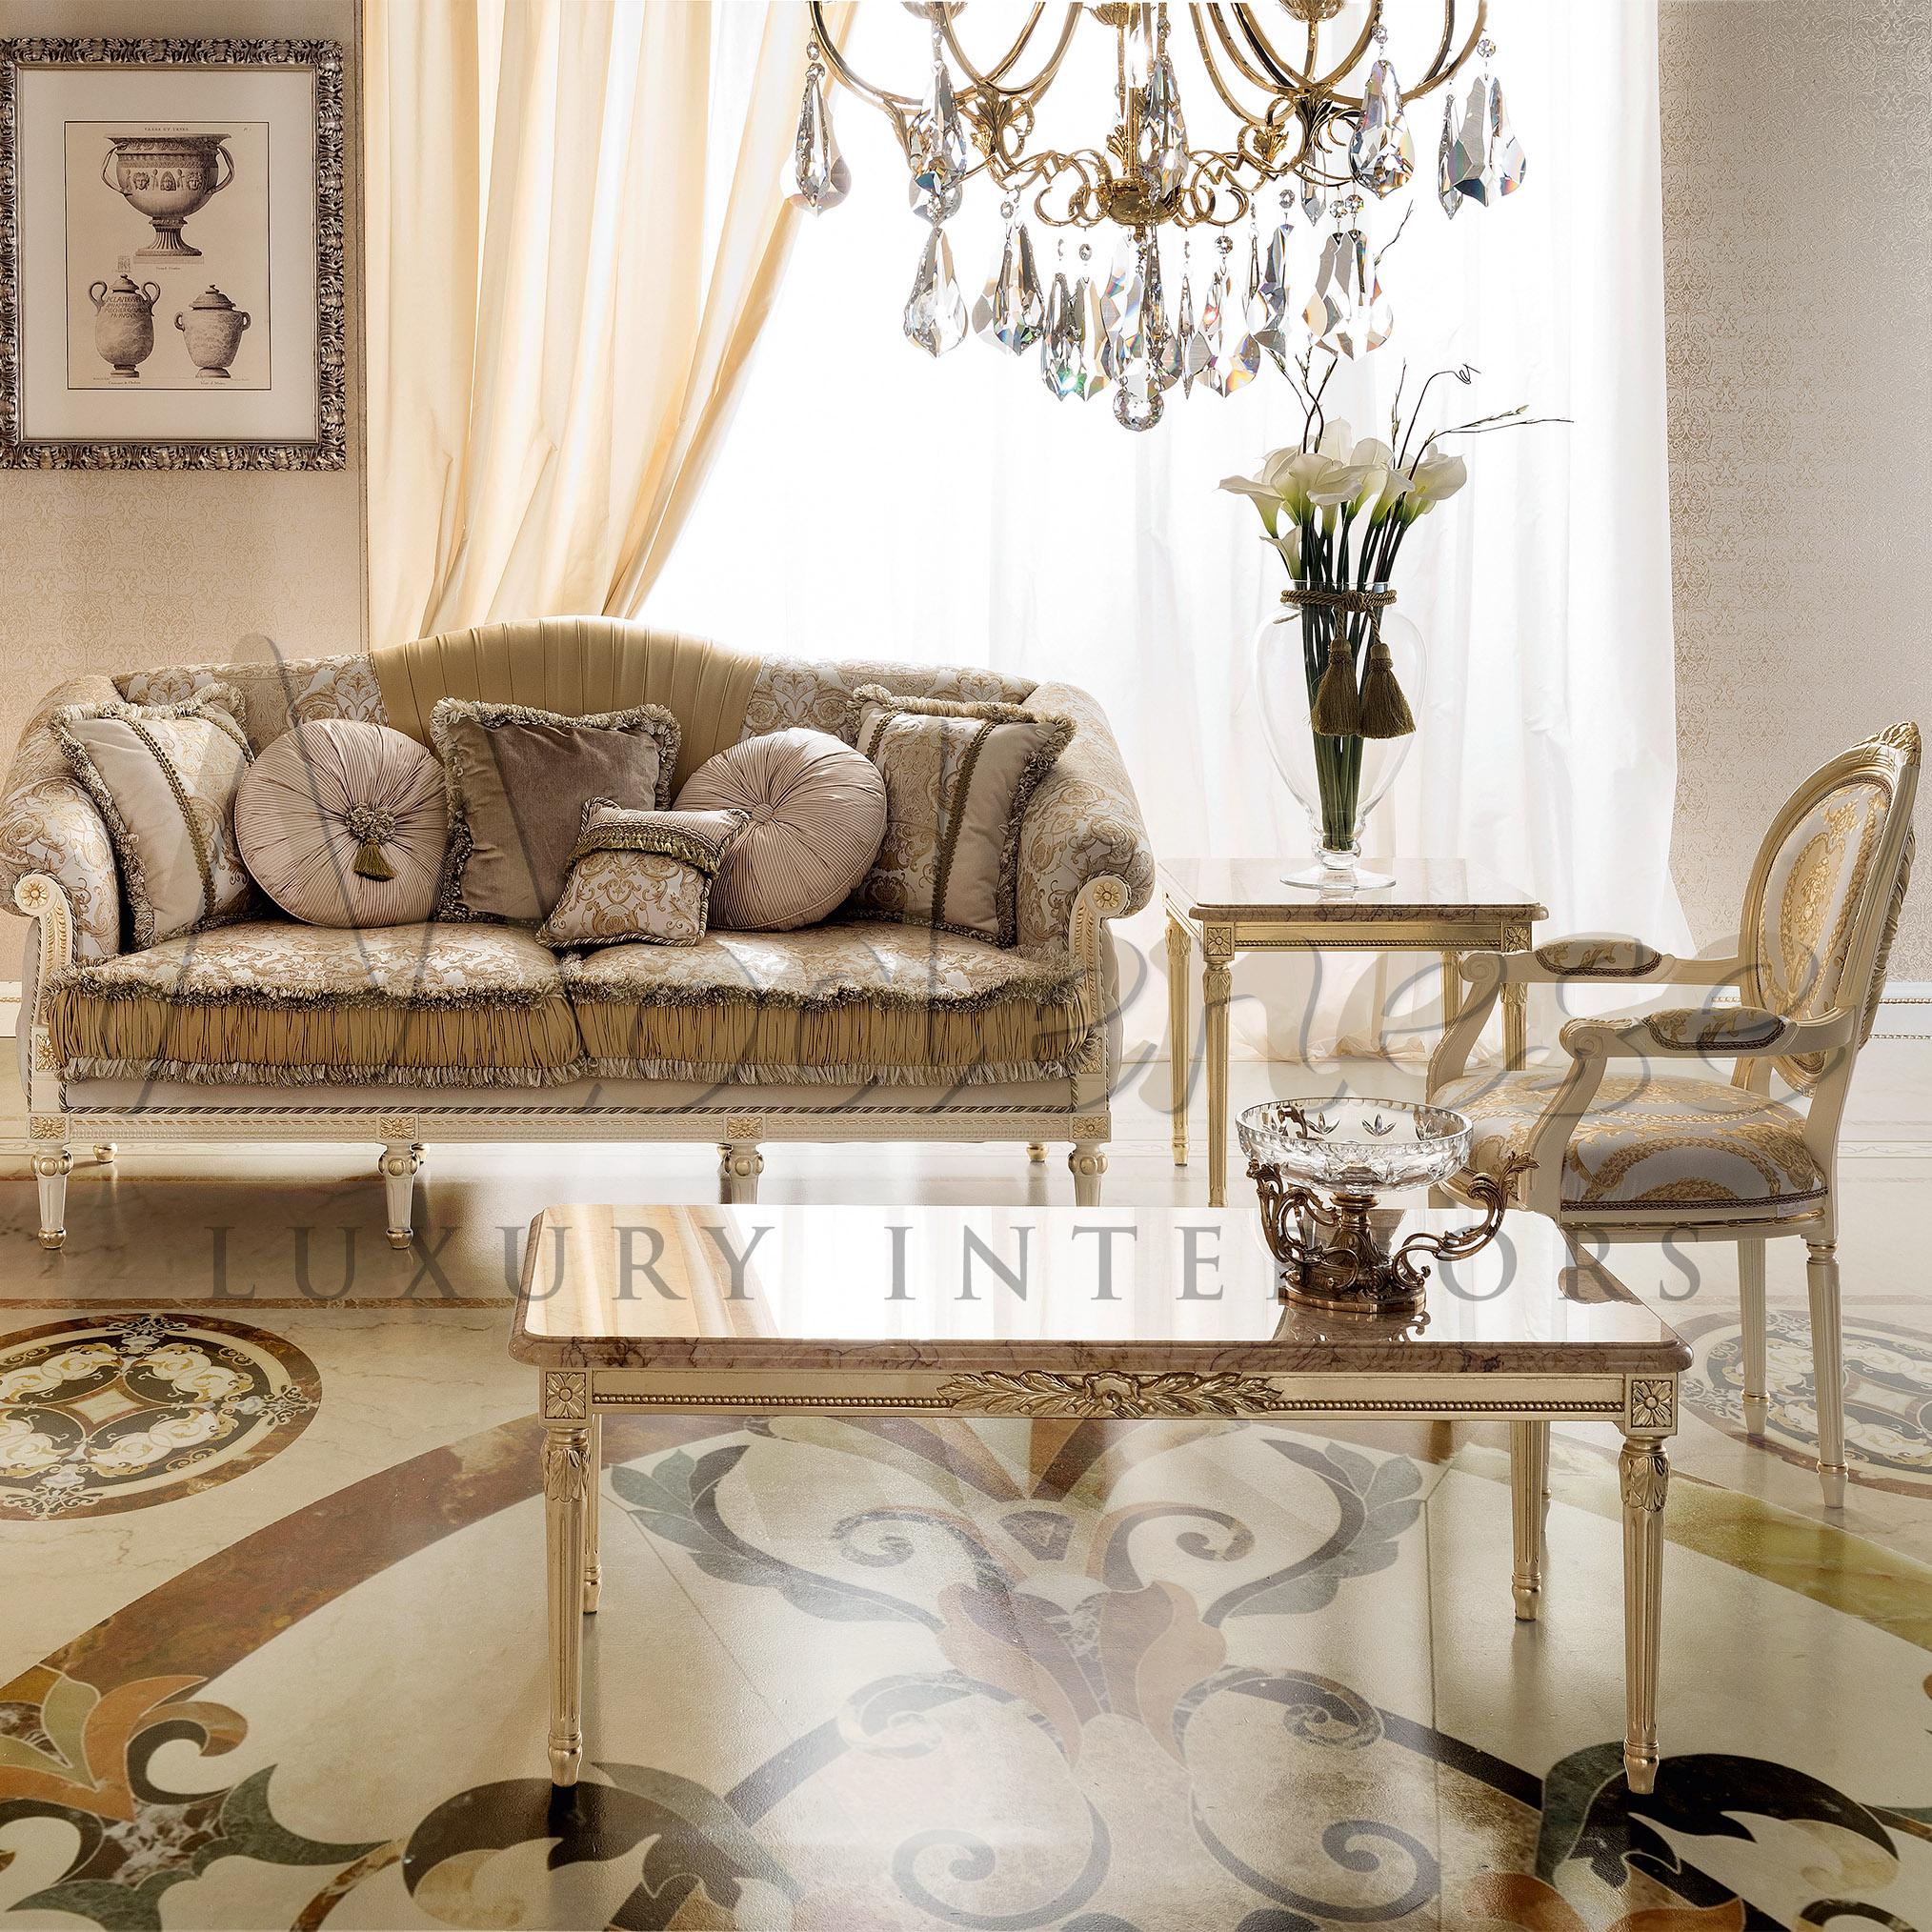 Bespoke rectangular Honey Onyx marble coffee table. Its elegant and linear empire-style legs make this piece an unique piece of luxury furniture to keep your sofas company in your spacious living room. Goes adorably with cream-colored sofas and